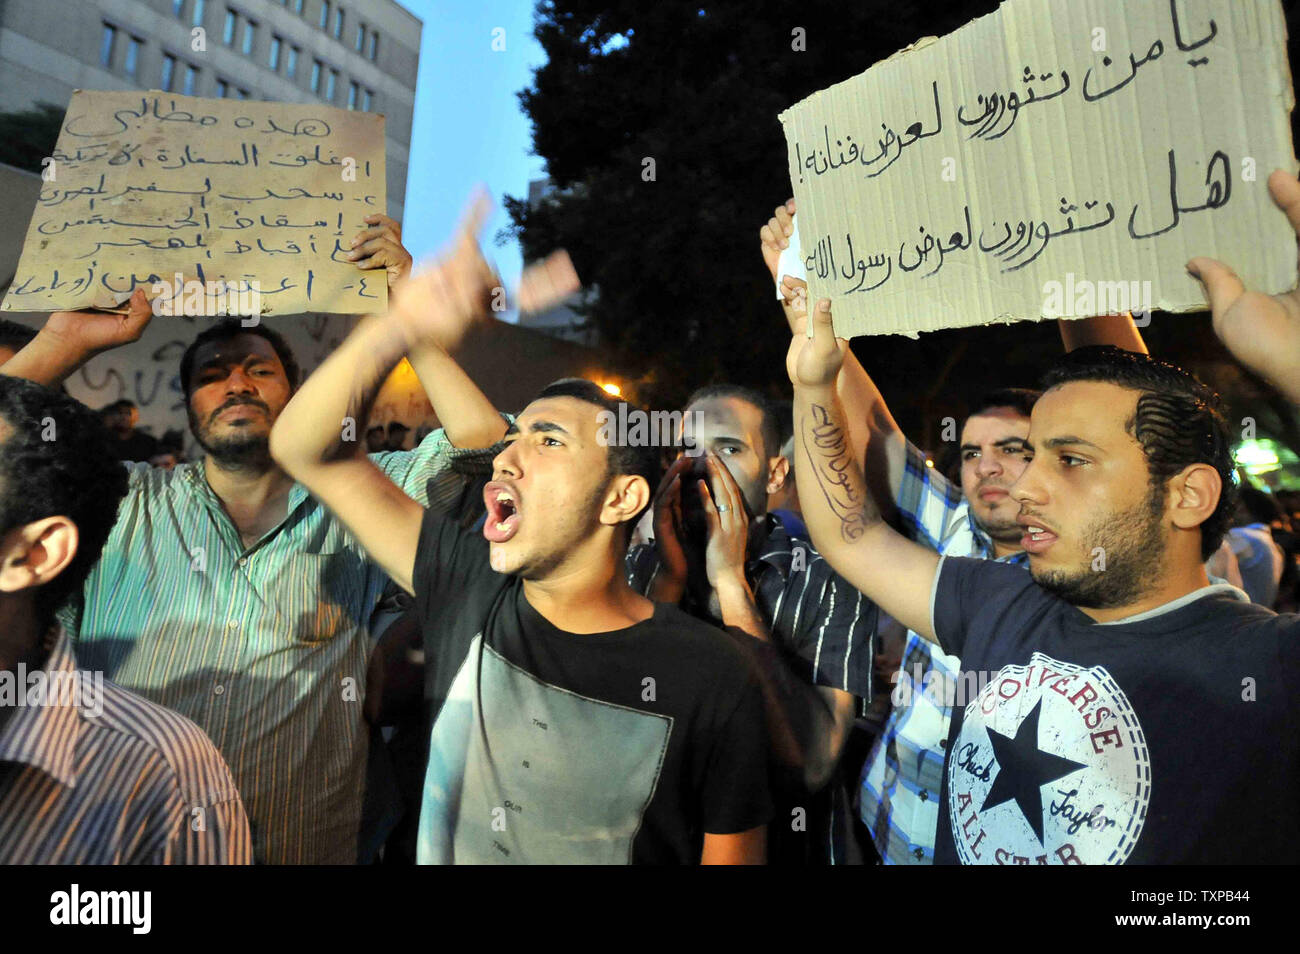 Egyptian shout slogans during a protest in front of the U.S. embassy in Cairo September 12, 2012, a demonstration against a film deemed offensive to Islam and the Prophet Mohammad. In Libya, Islamic extremists killed the American ambassador as they stormed the American consulate in Benghazi in anger against the little known film by an amateur American filmmaker. UPI Stock Photo